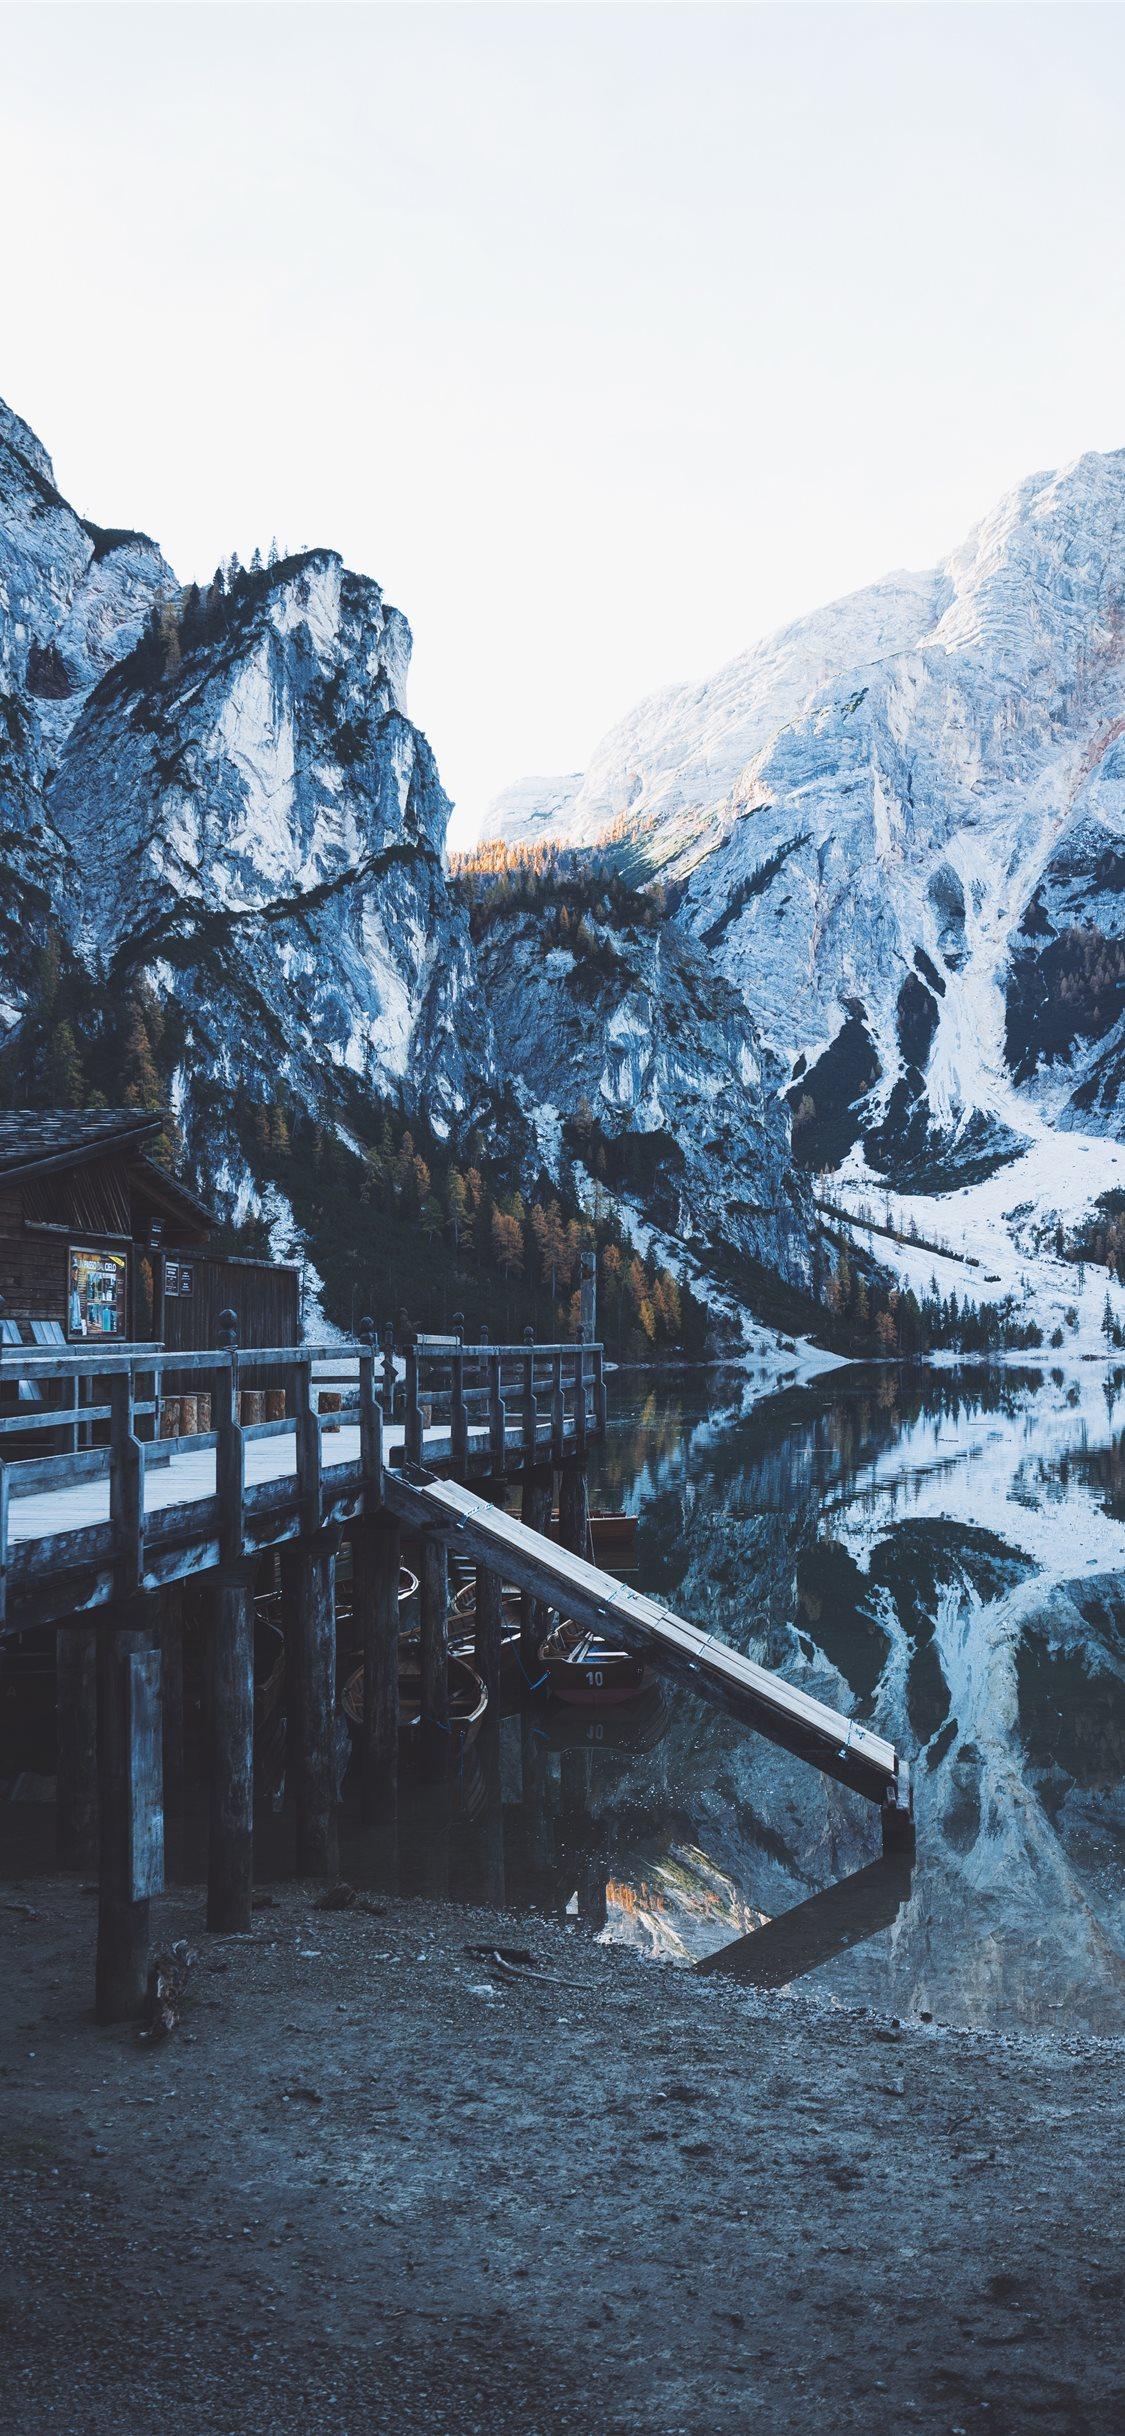 Dreamy morning at Lake of Instagram iPhone X Wallpaper Free